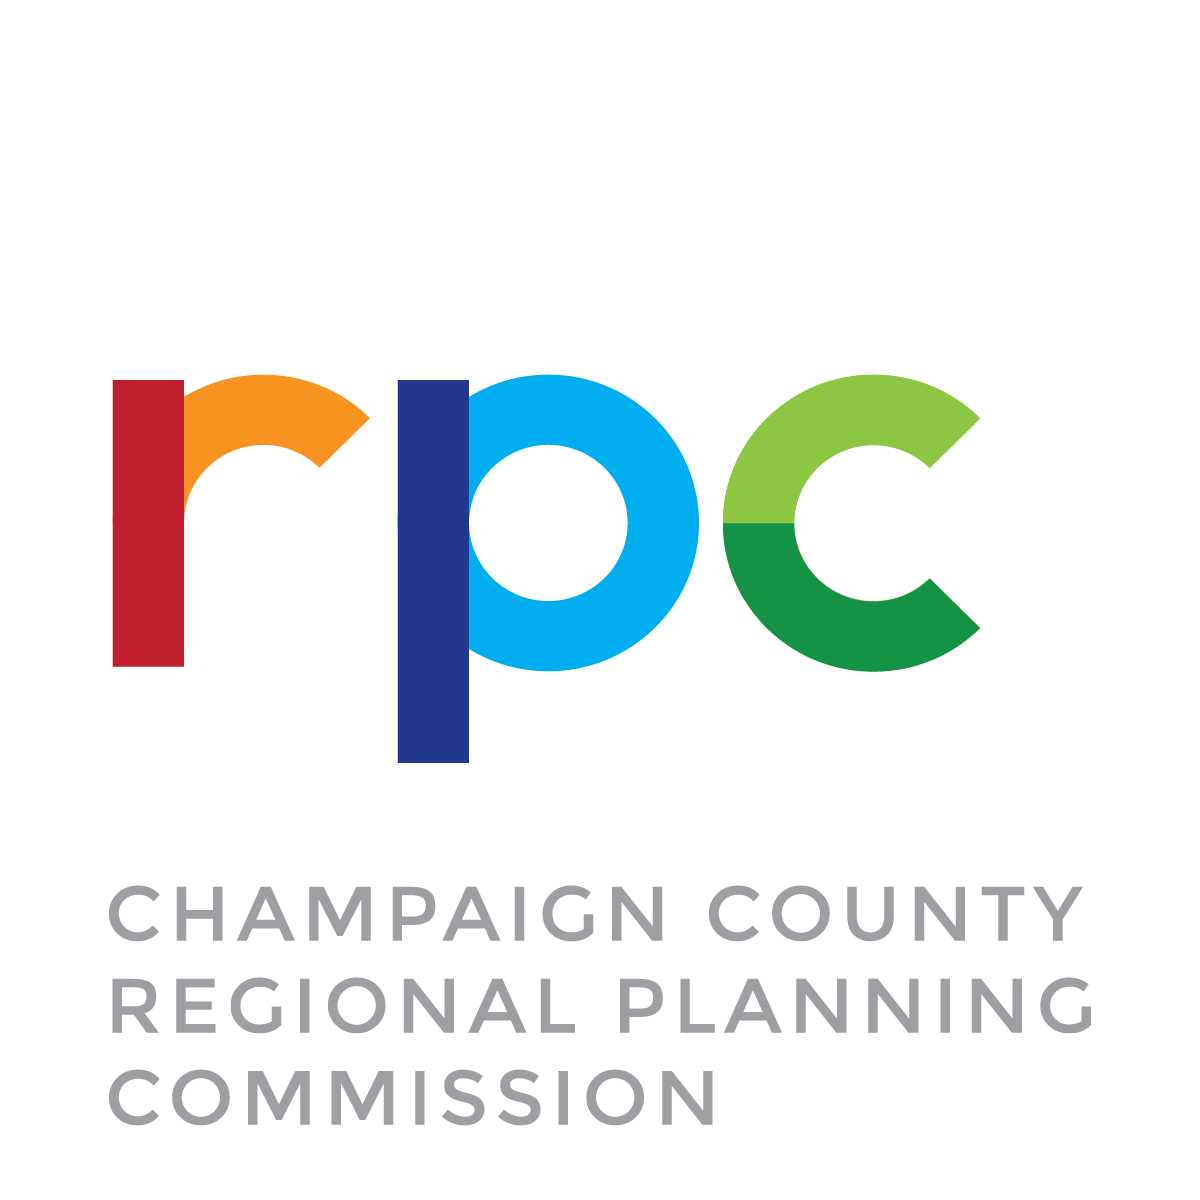 Champaign County Regional Planning Commission